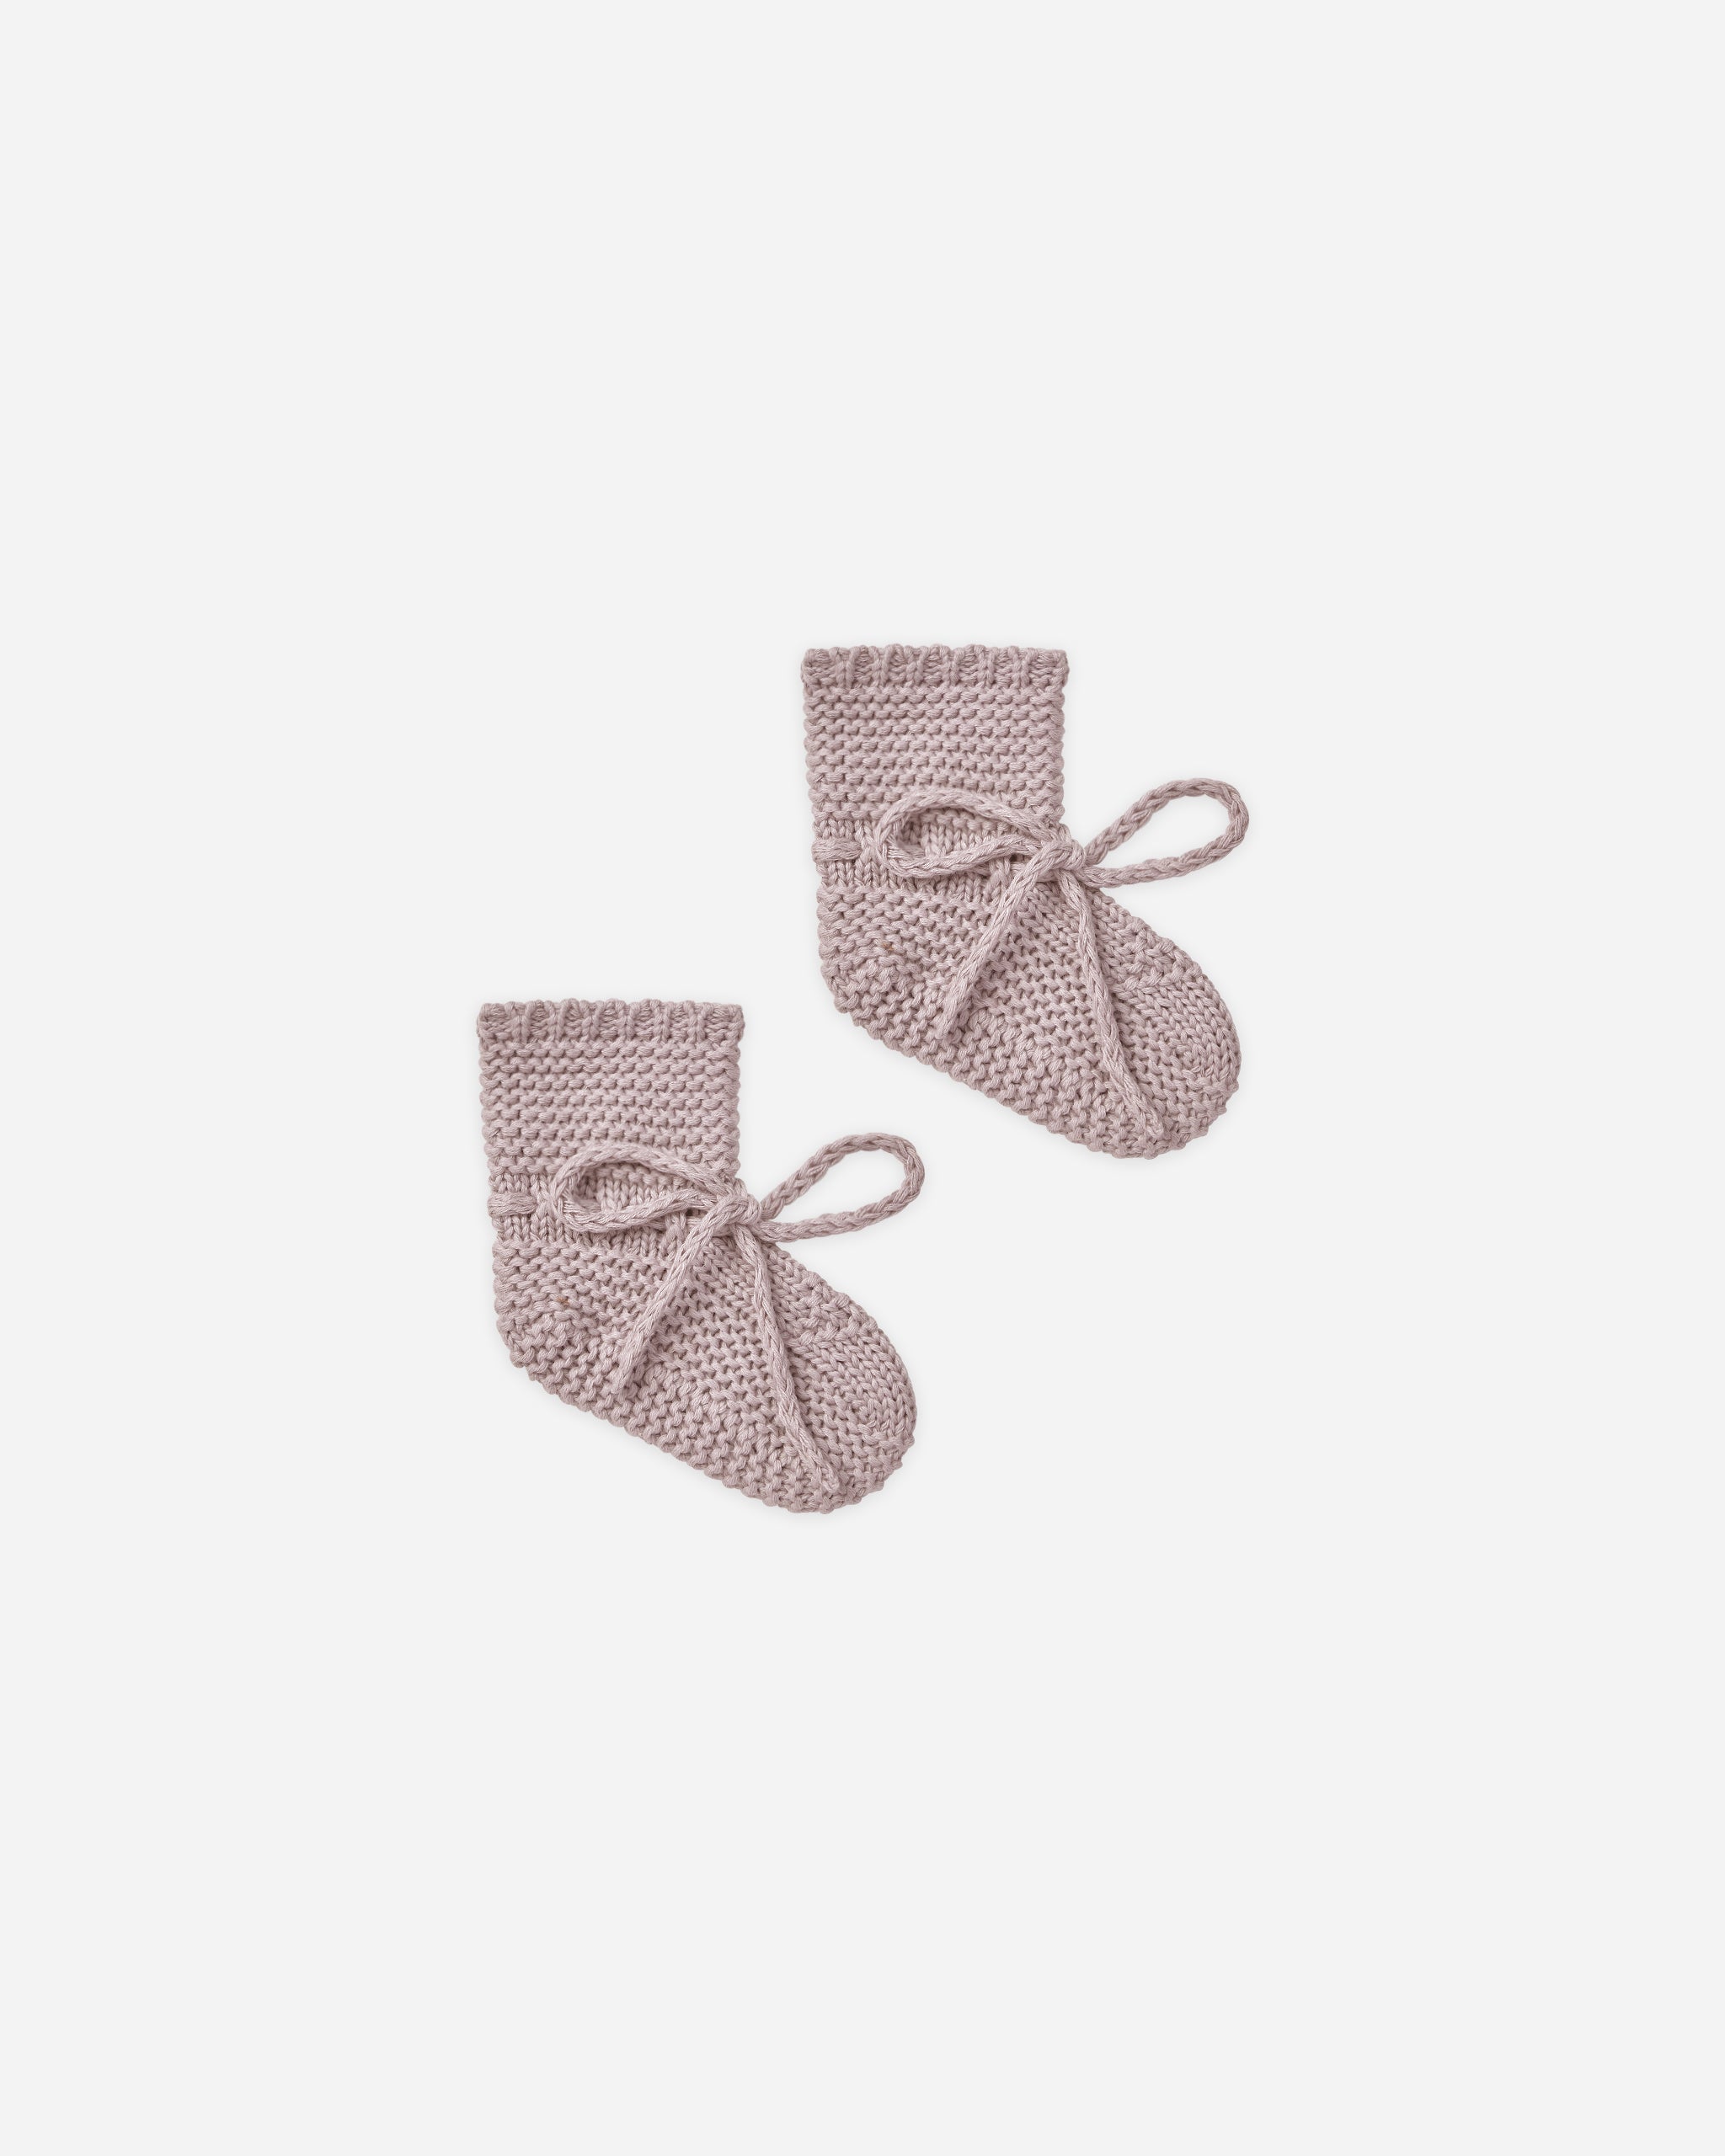 Knit Booties || Lavender - Rylee + Cru | Kids Clothes | Trendy Baby Clothes | Modern Infant Outfits |